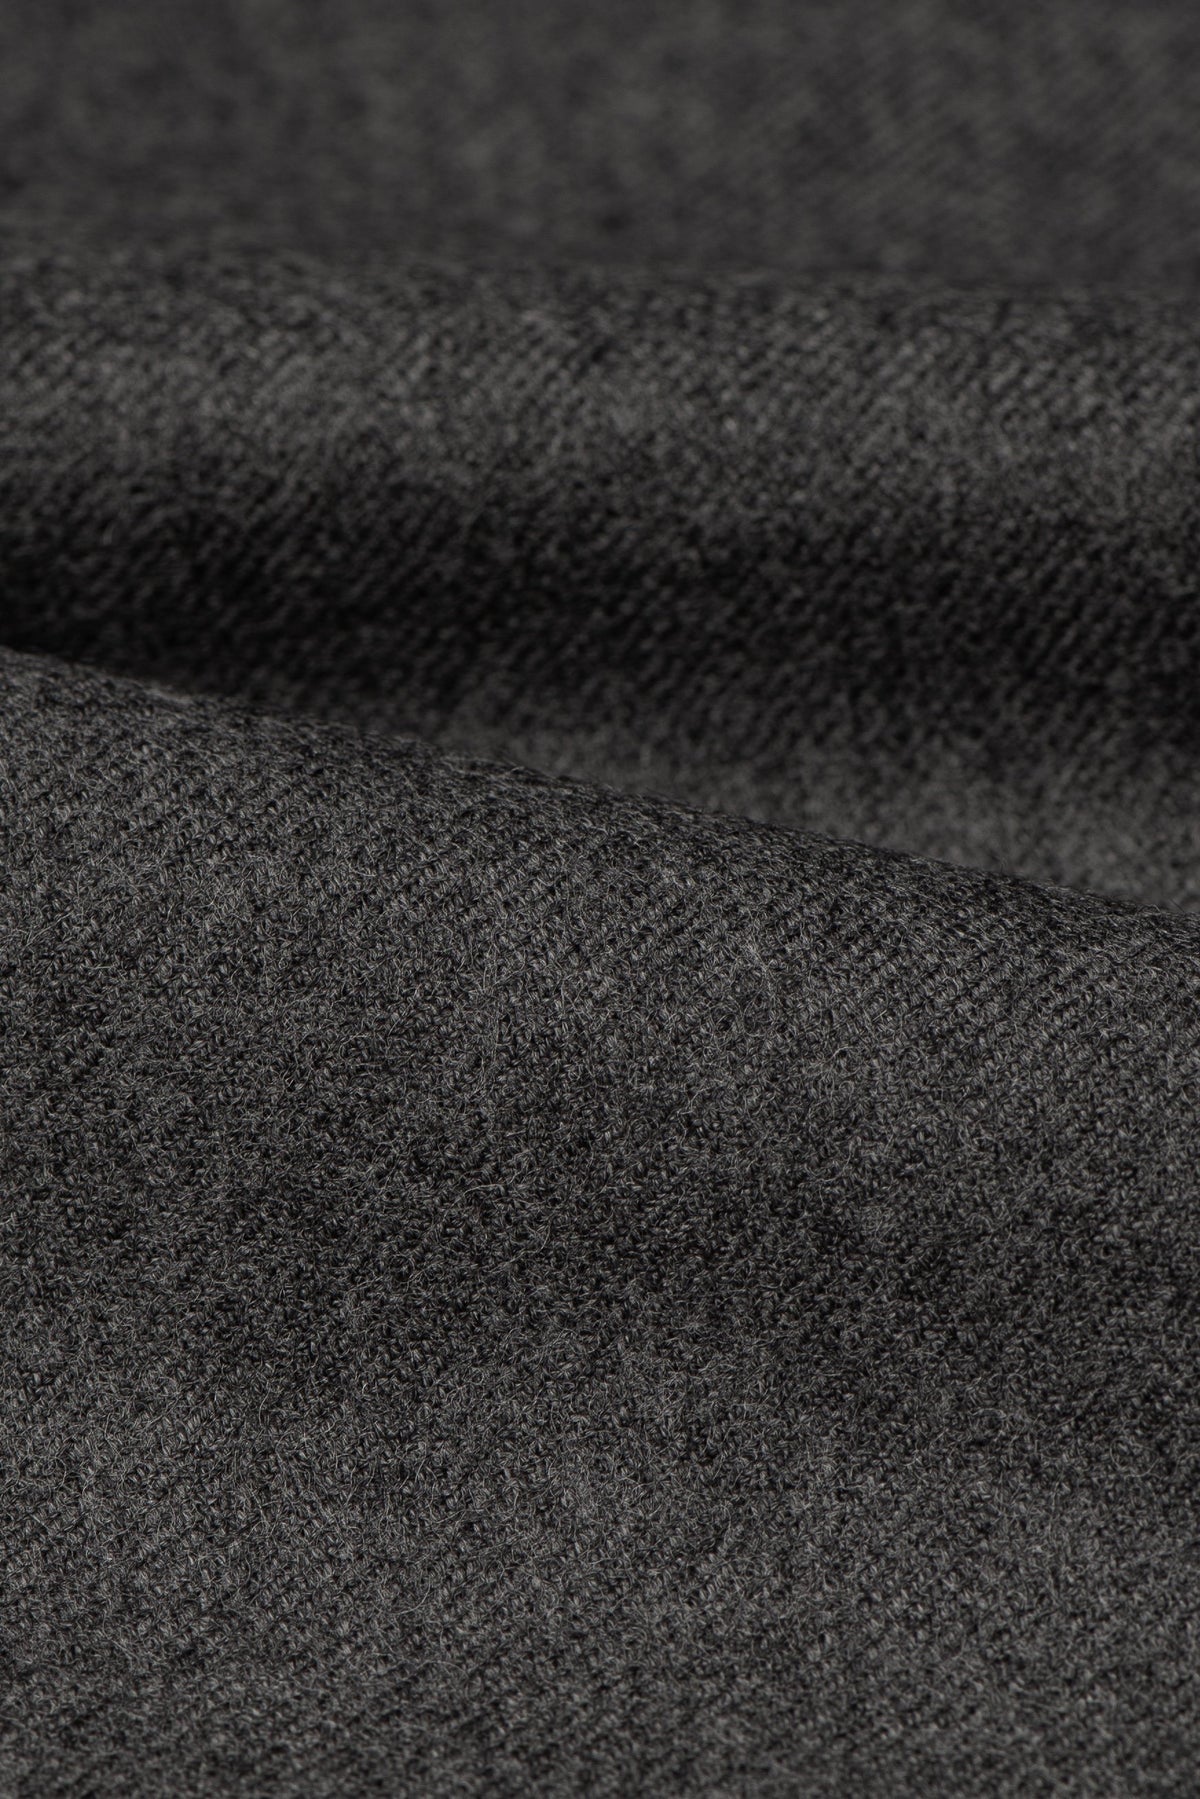 gray flannel texture